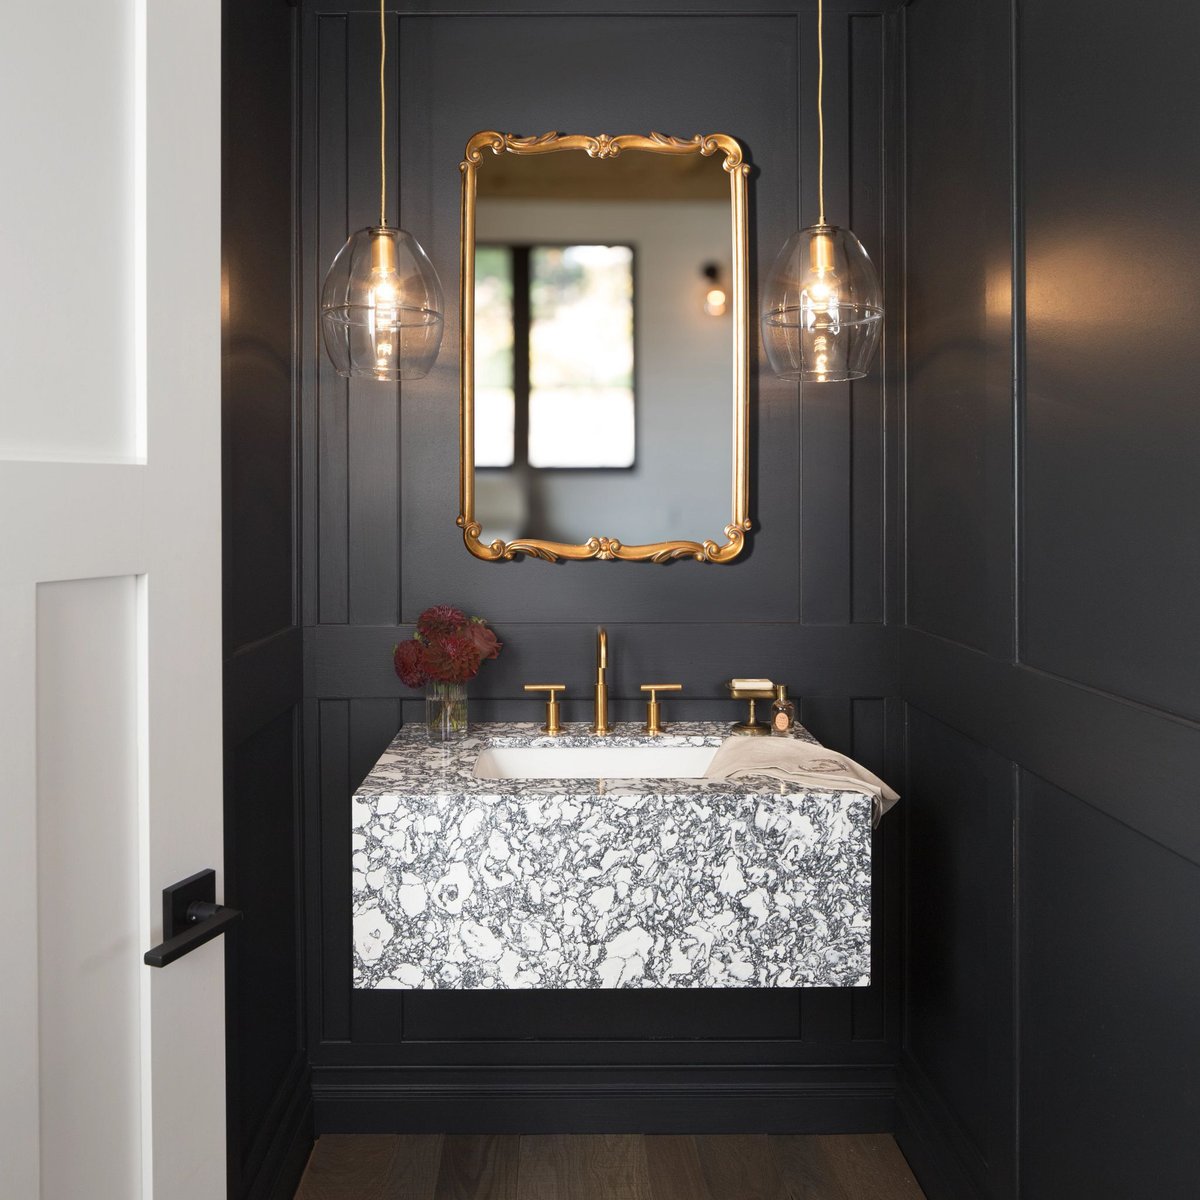 Do floating vanities catch your eye like they do ours?  The #MyCambria Rose Bay floating vanity is the centerpiece of this powder bathroom bit.ly/3tPaIRY. #wearecambria @cambriasufaces